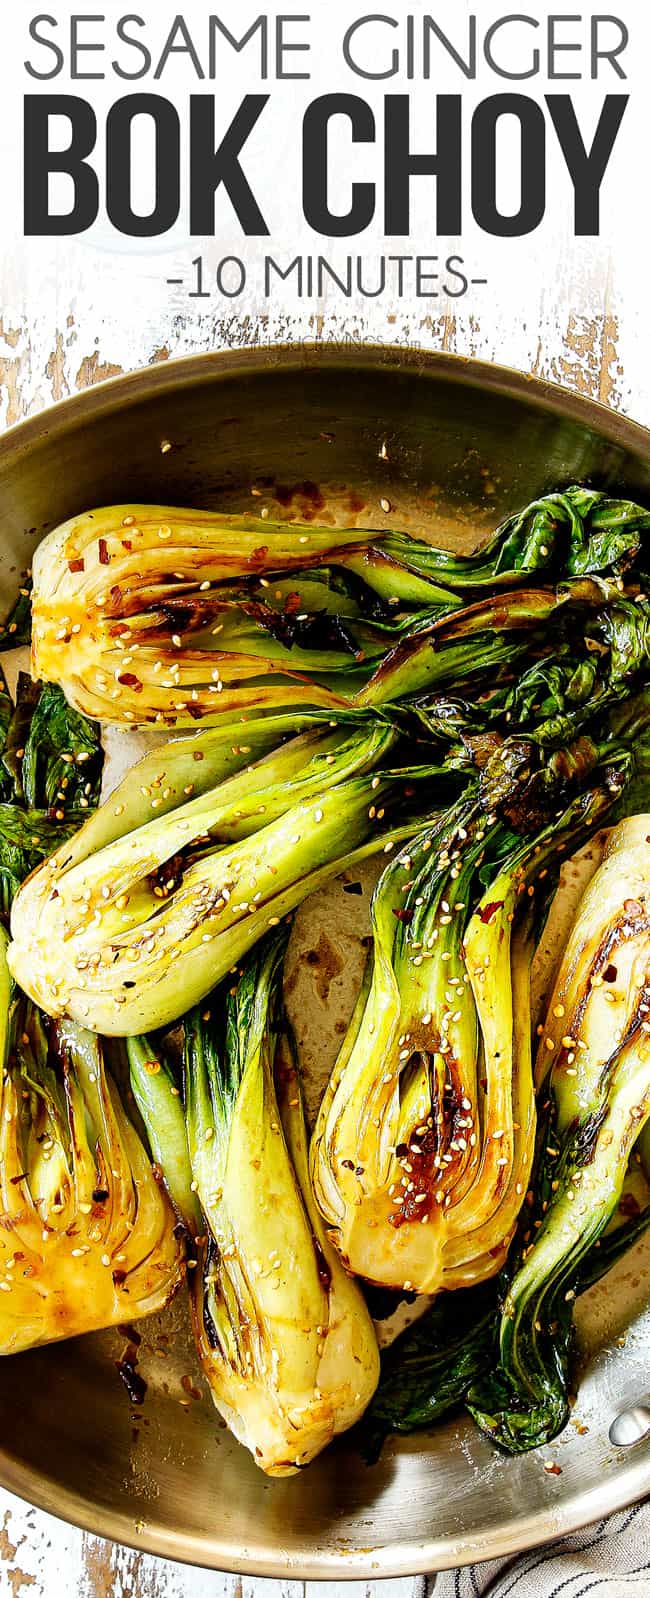 top view of bok choy recipe glazed in sesame soy sauce 